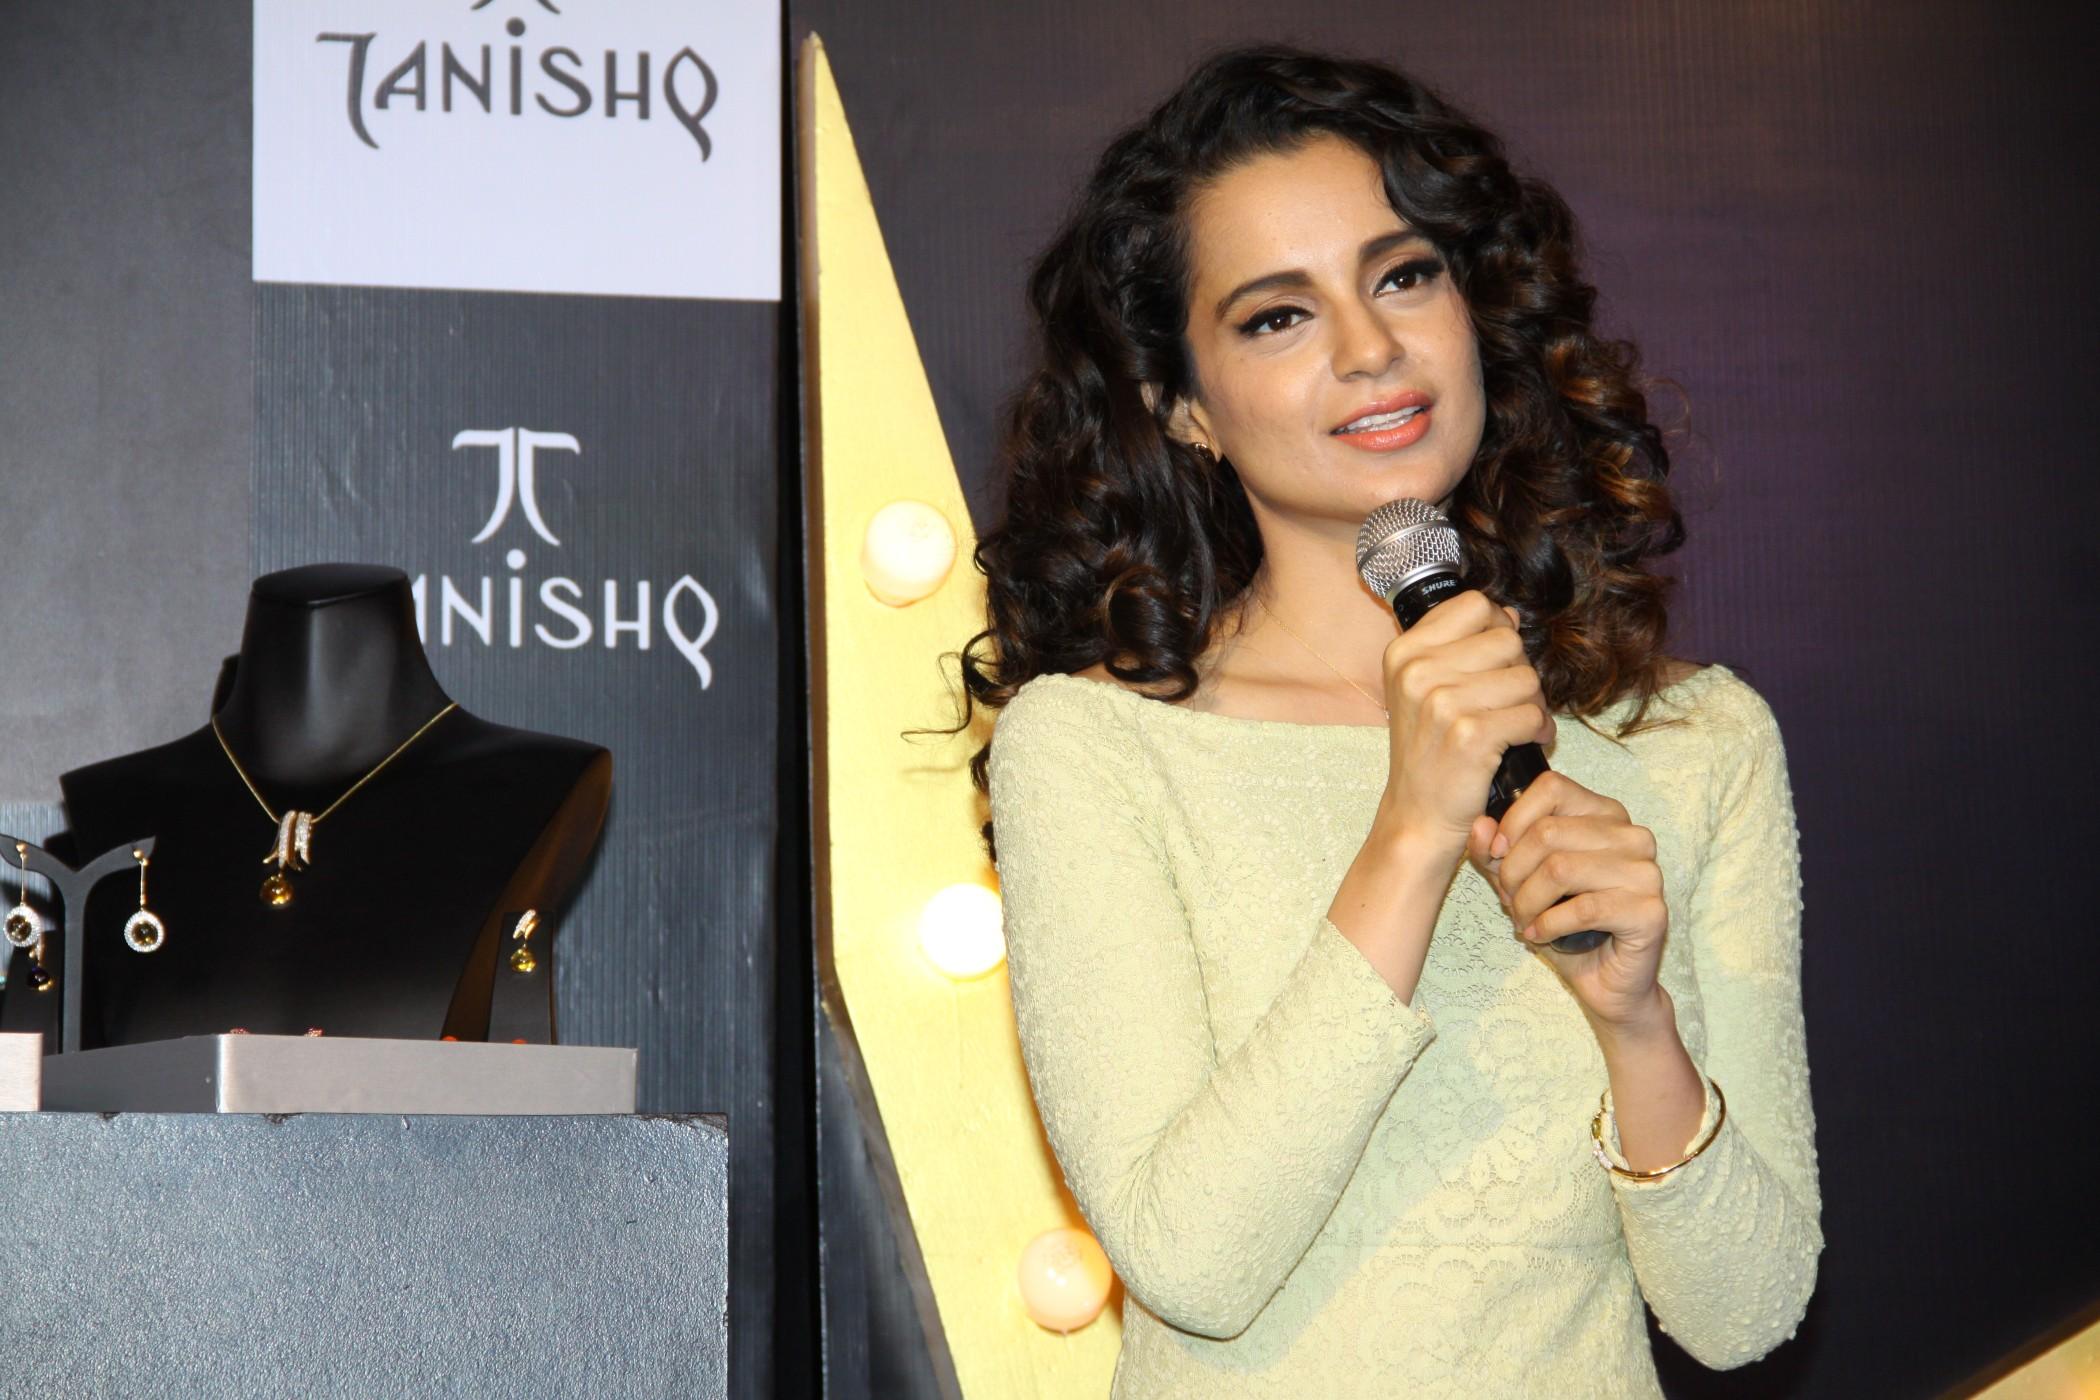 Tanishq IVA 2 Jewellery Collection Launch